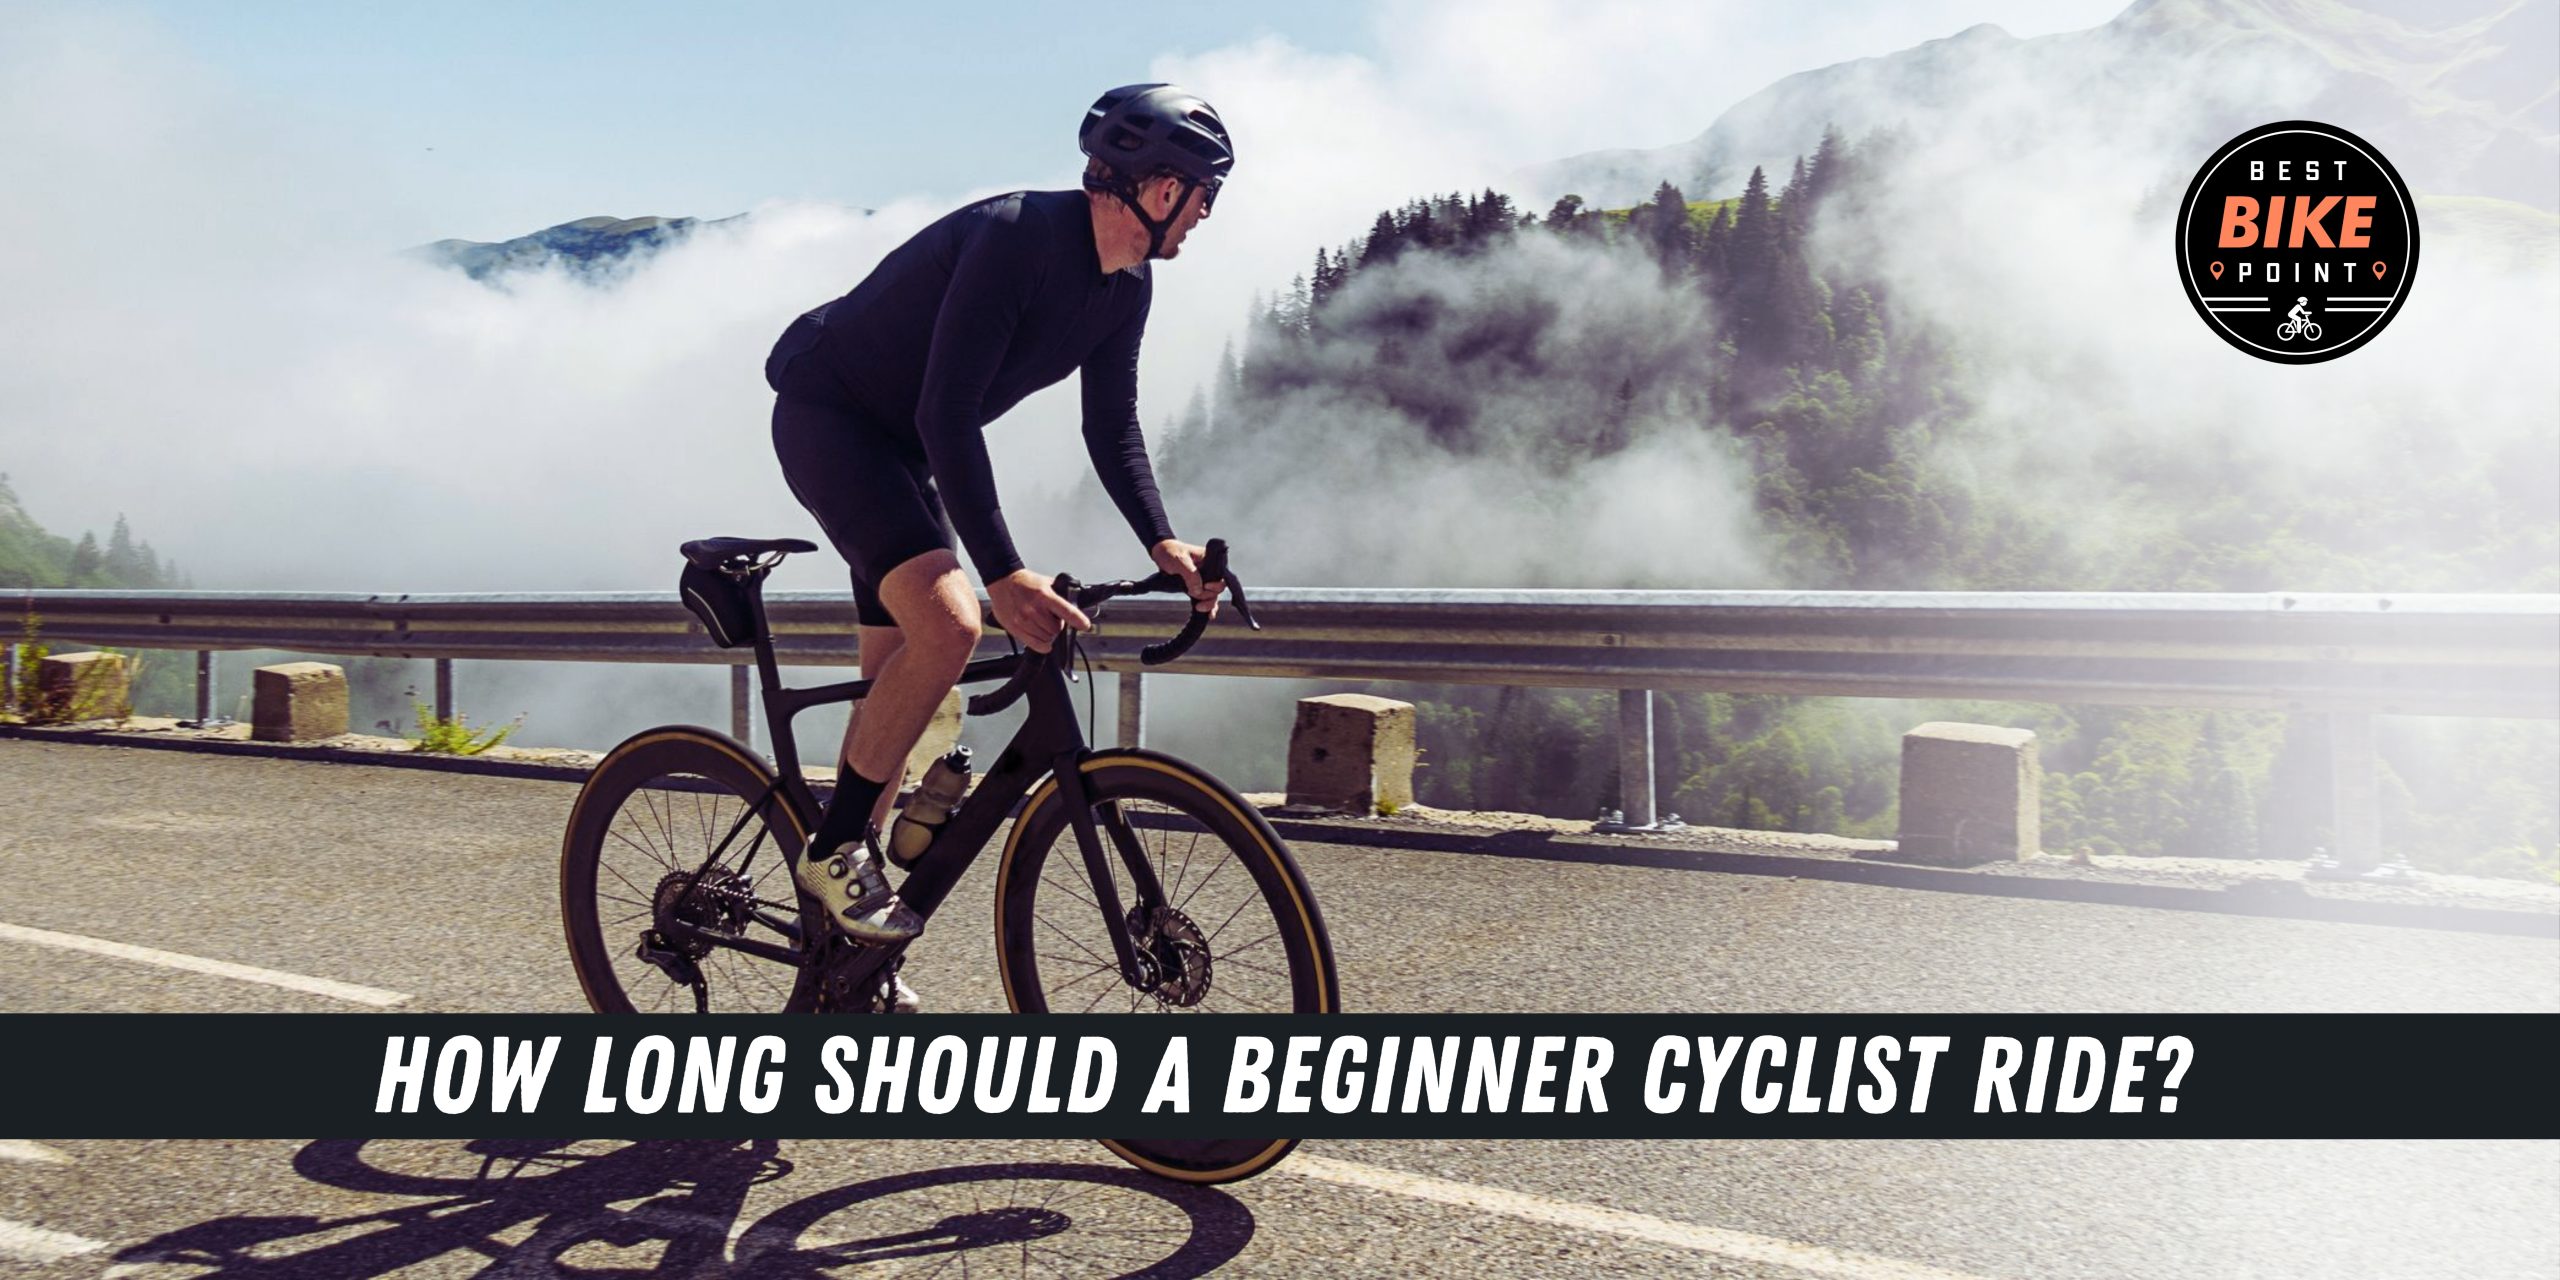 How Long Should a Beginner Cyclist Ride?